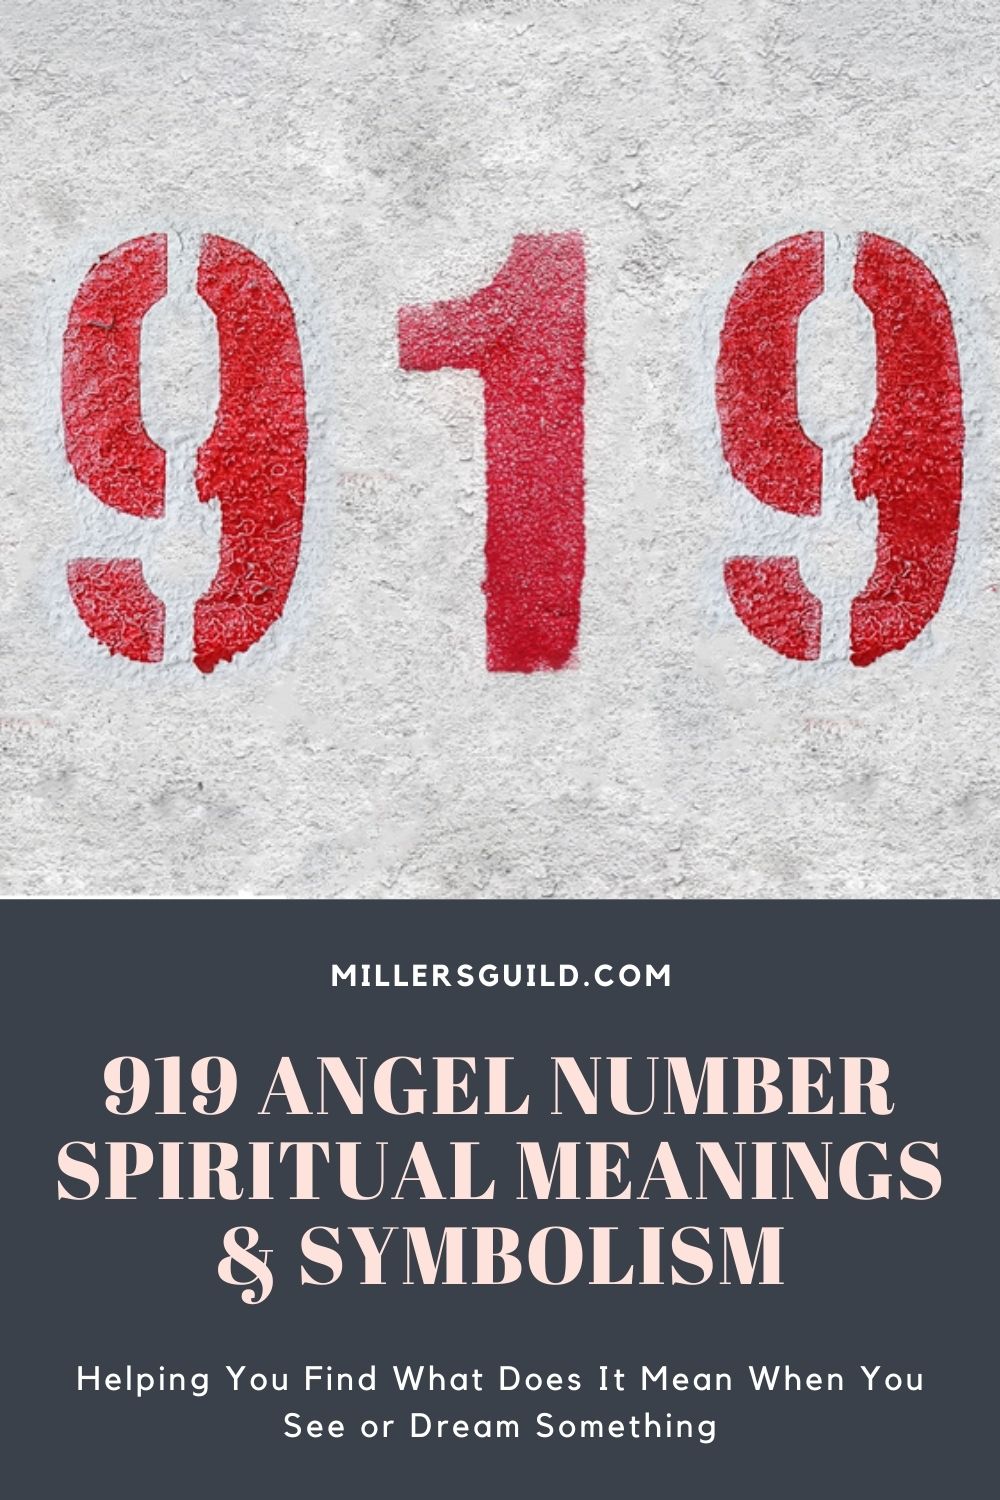 919 Angel Number Spiritual Meanings & Symbolism 2